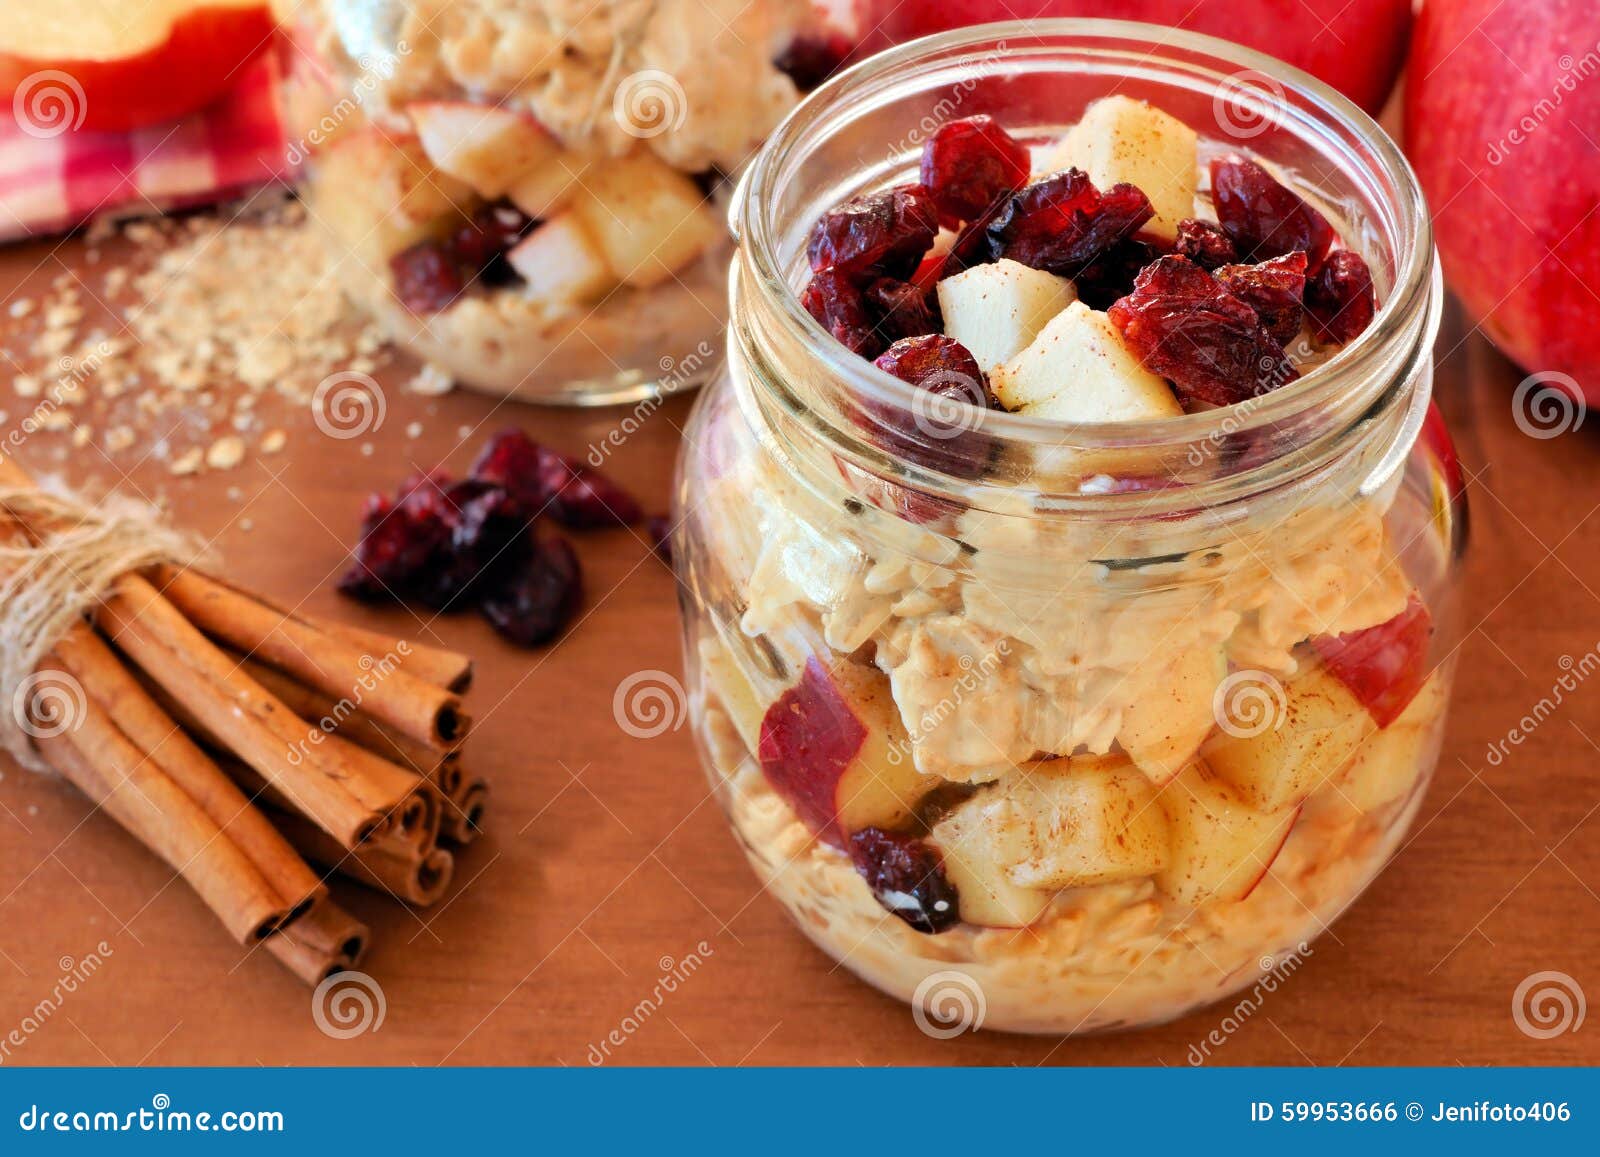 overnight oats with apples and cranberries in a mason jar